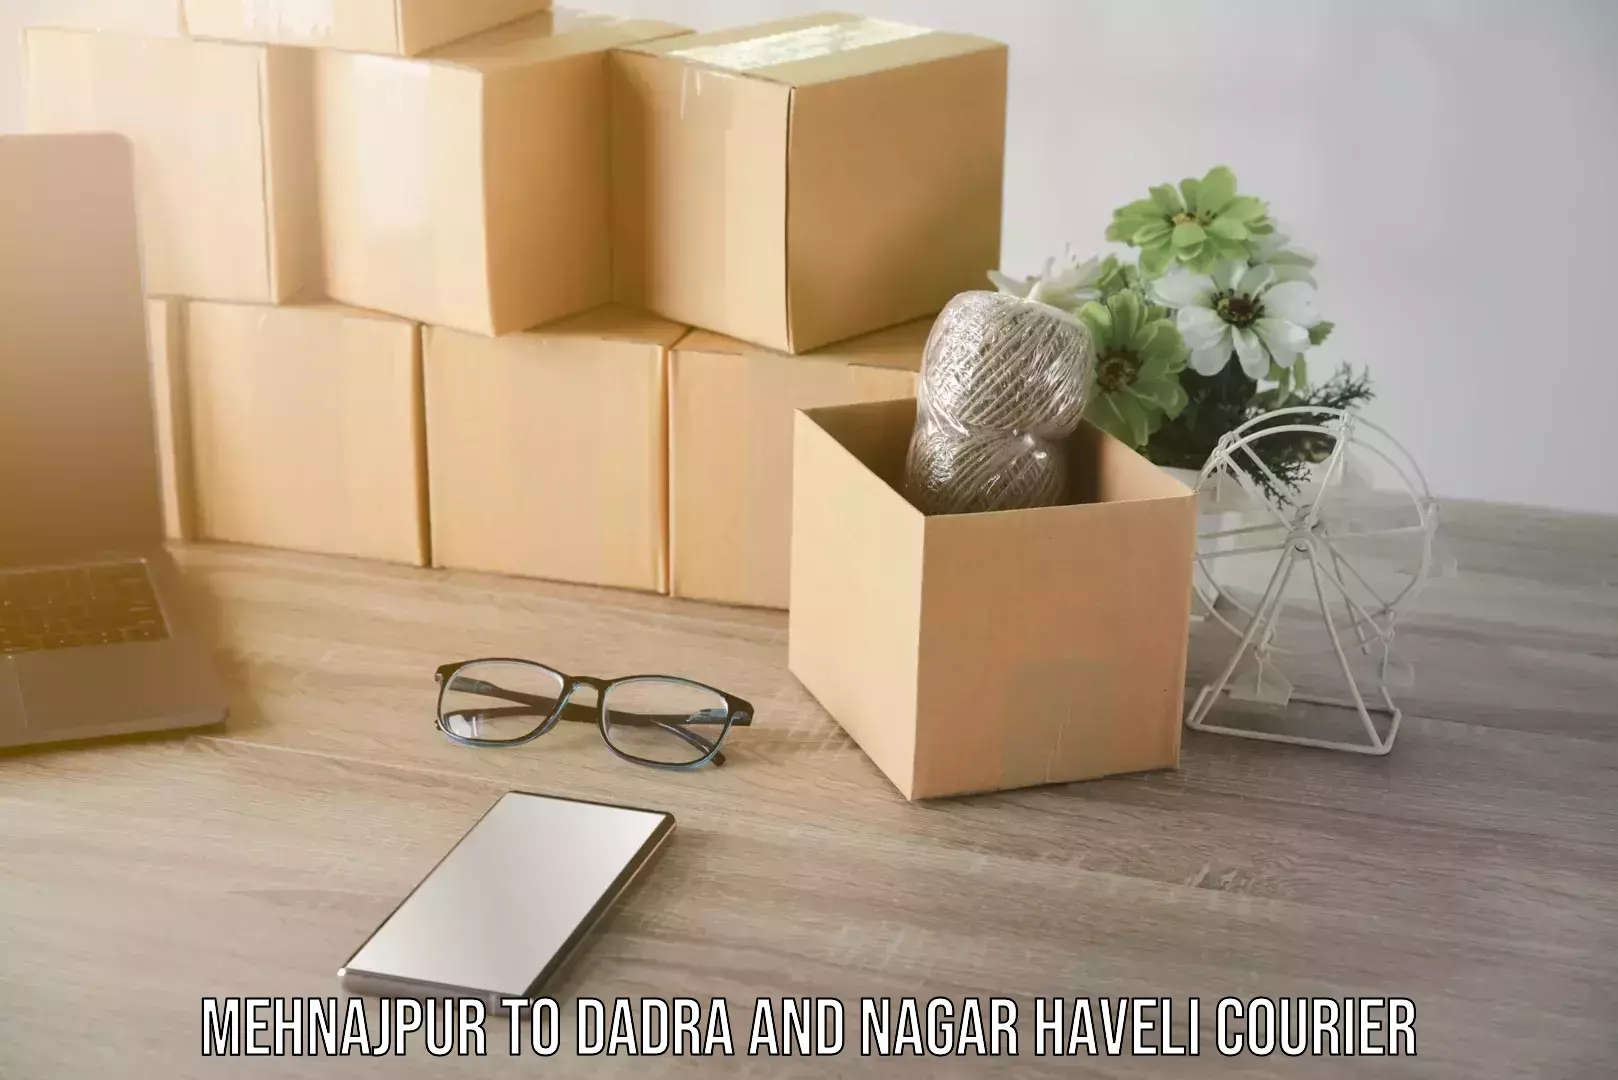 Professional home movers Mehnajpur to Dadra and Nagar Haveli